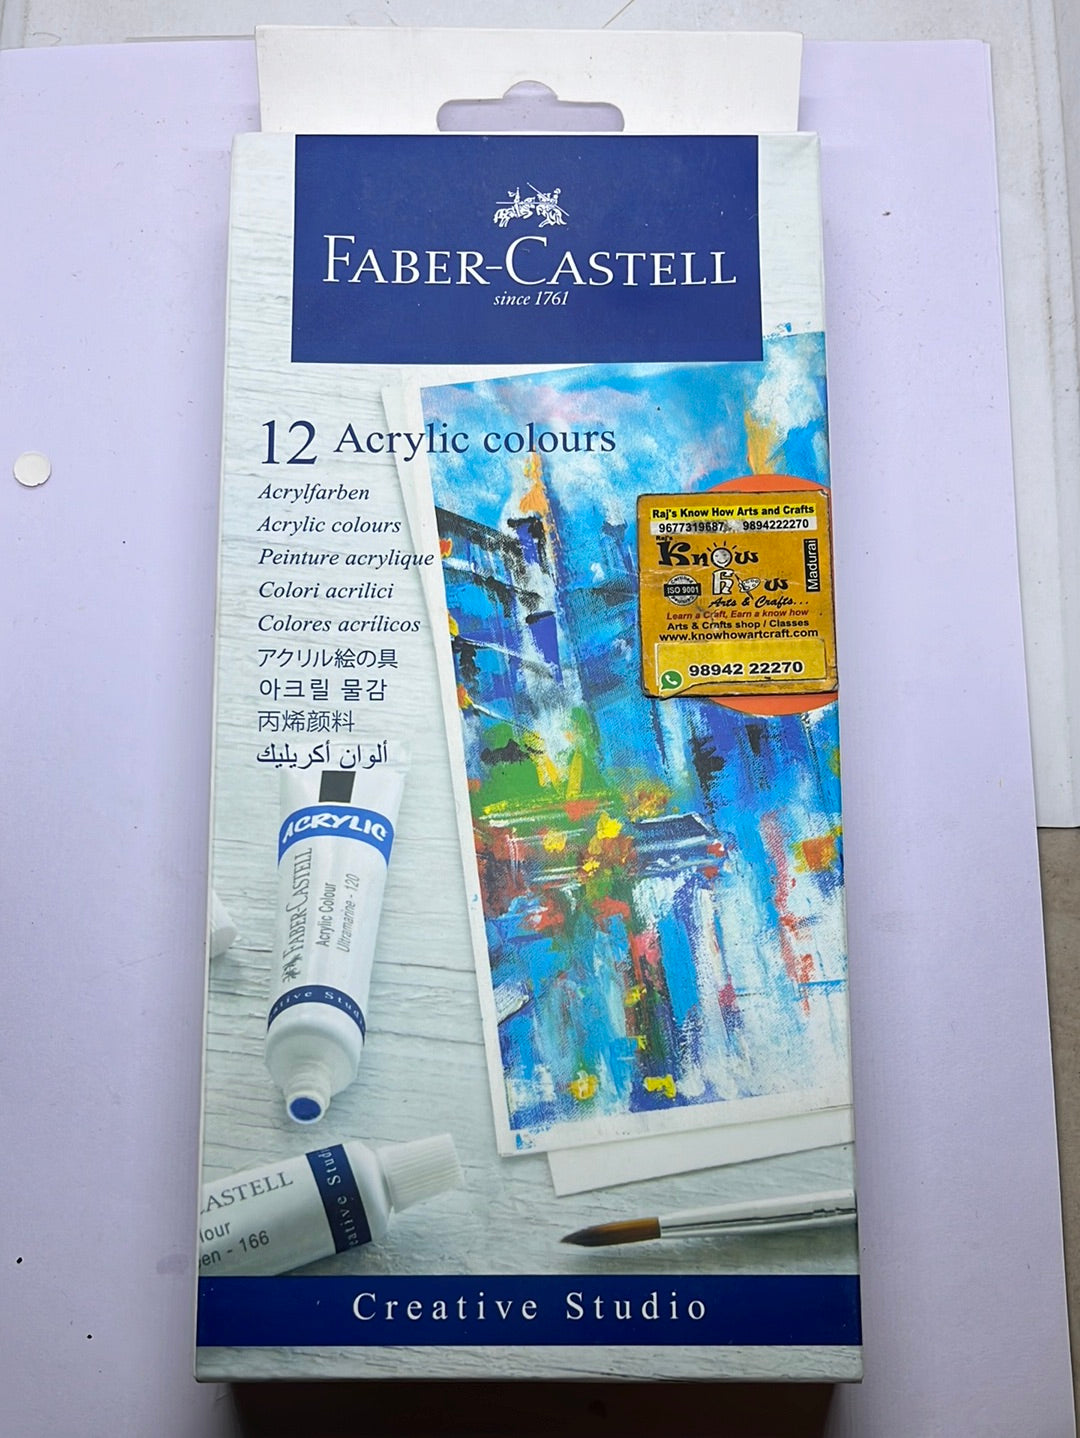 12 Acrylic Colours - Faber Castell